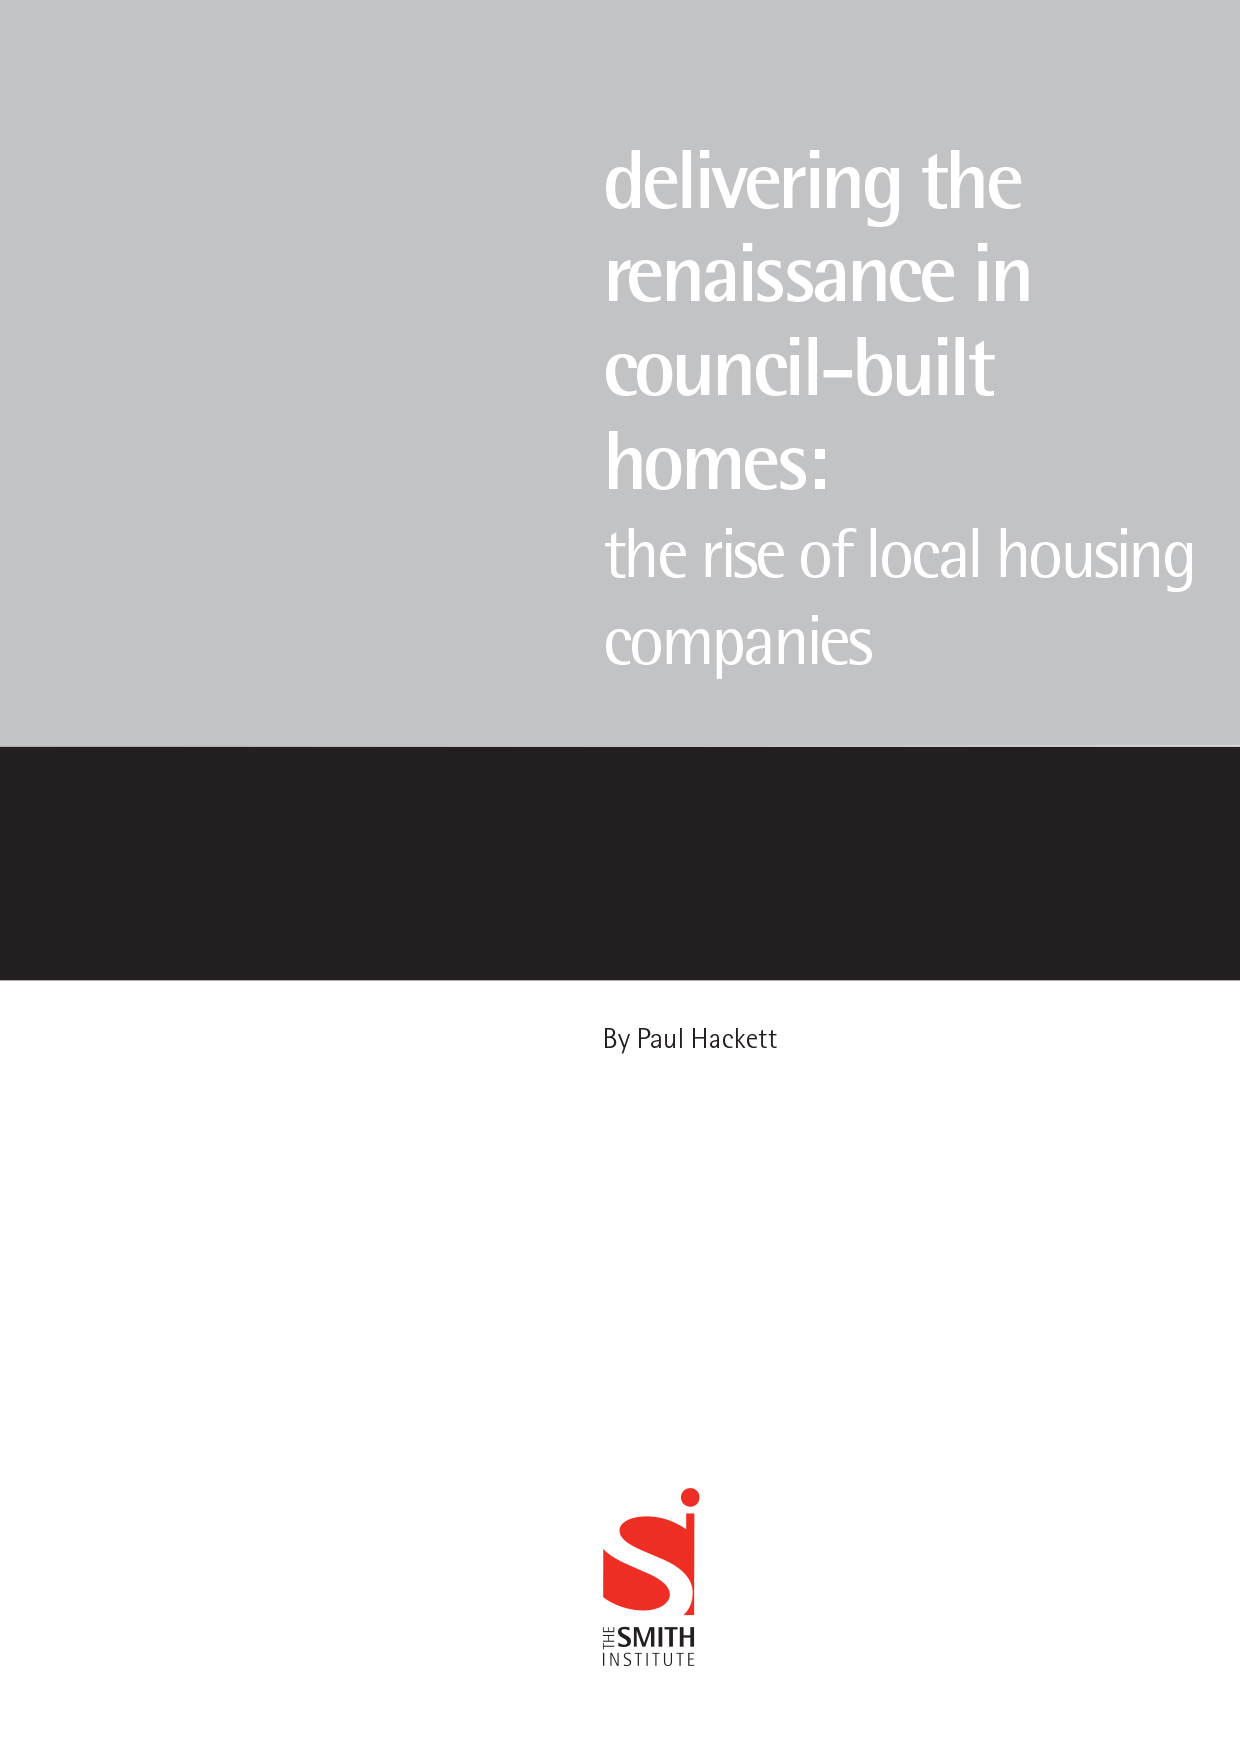 Delivering the renaissance in council-built homes: the rise of local housing companies